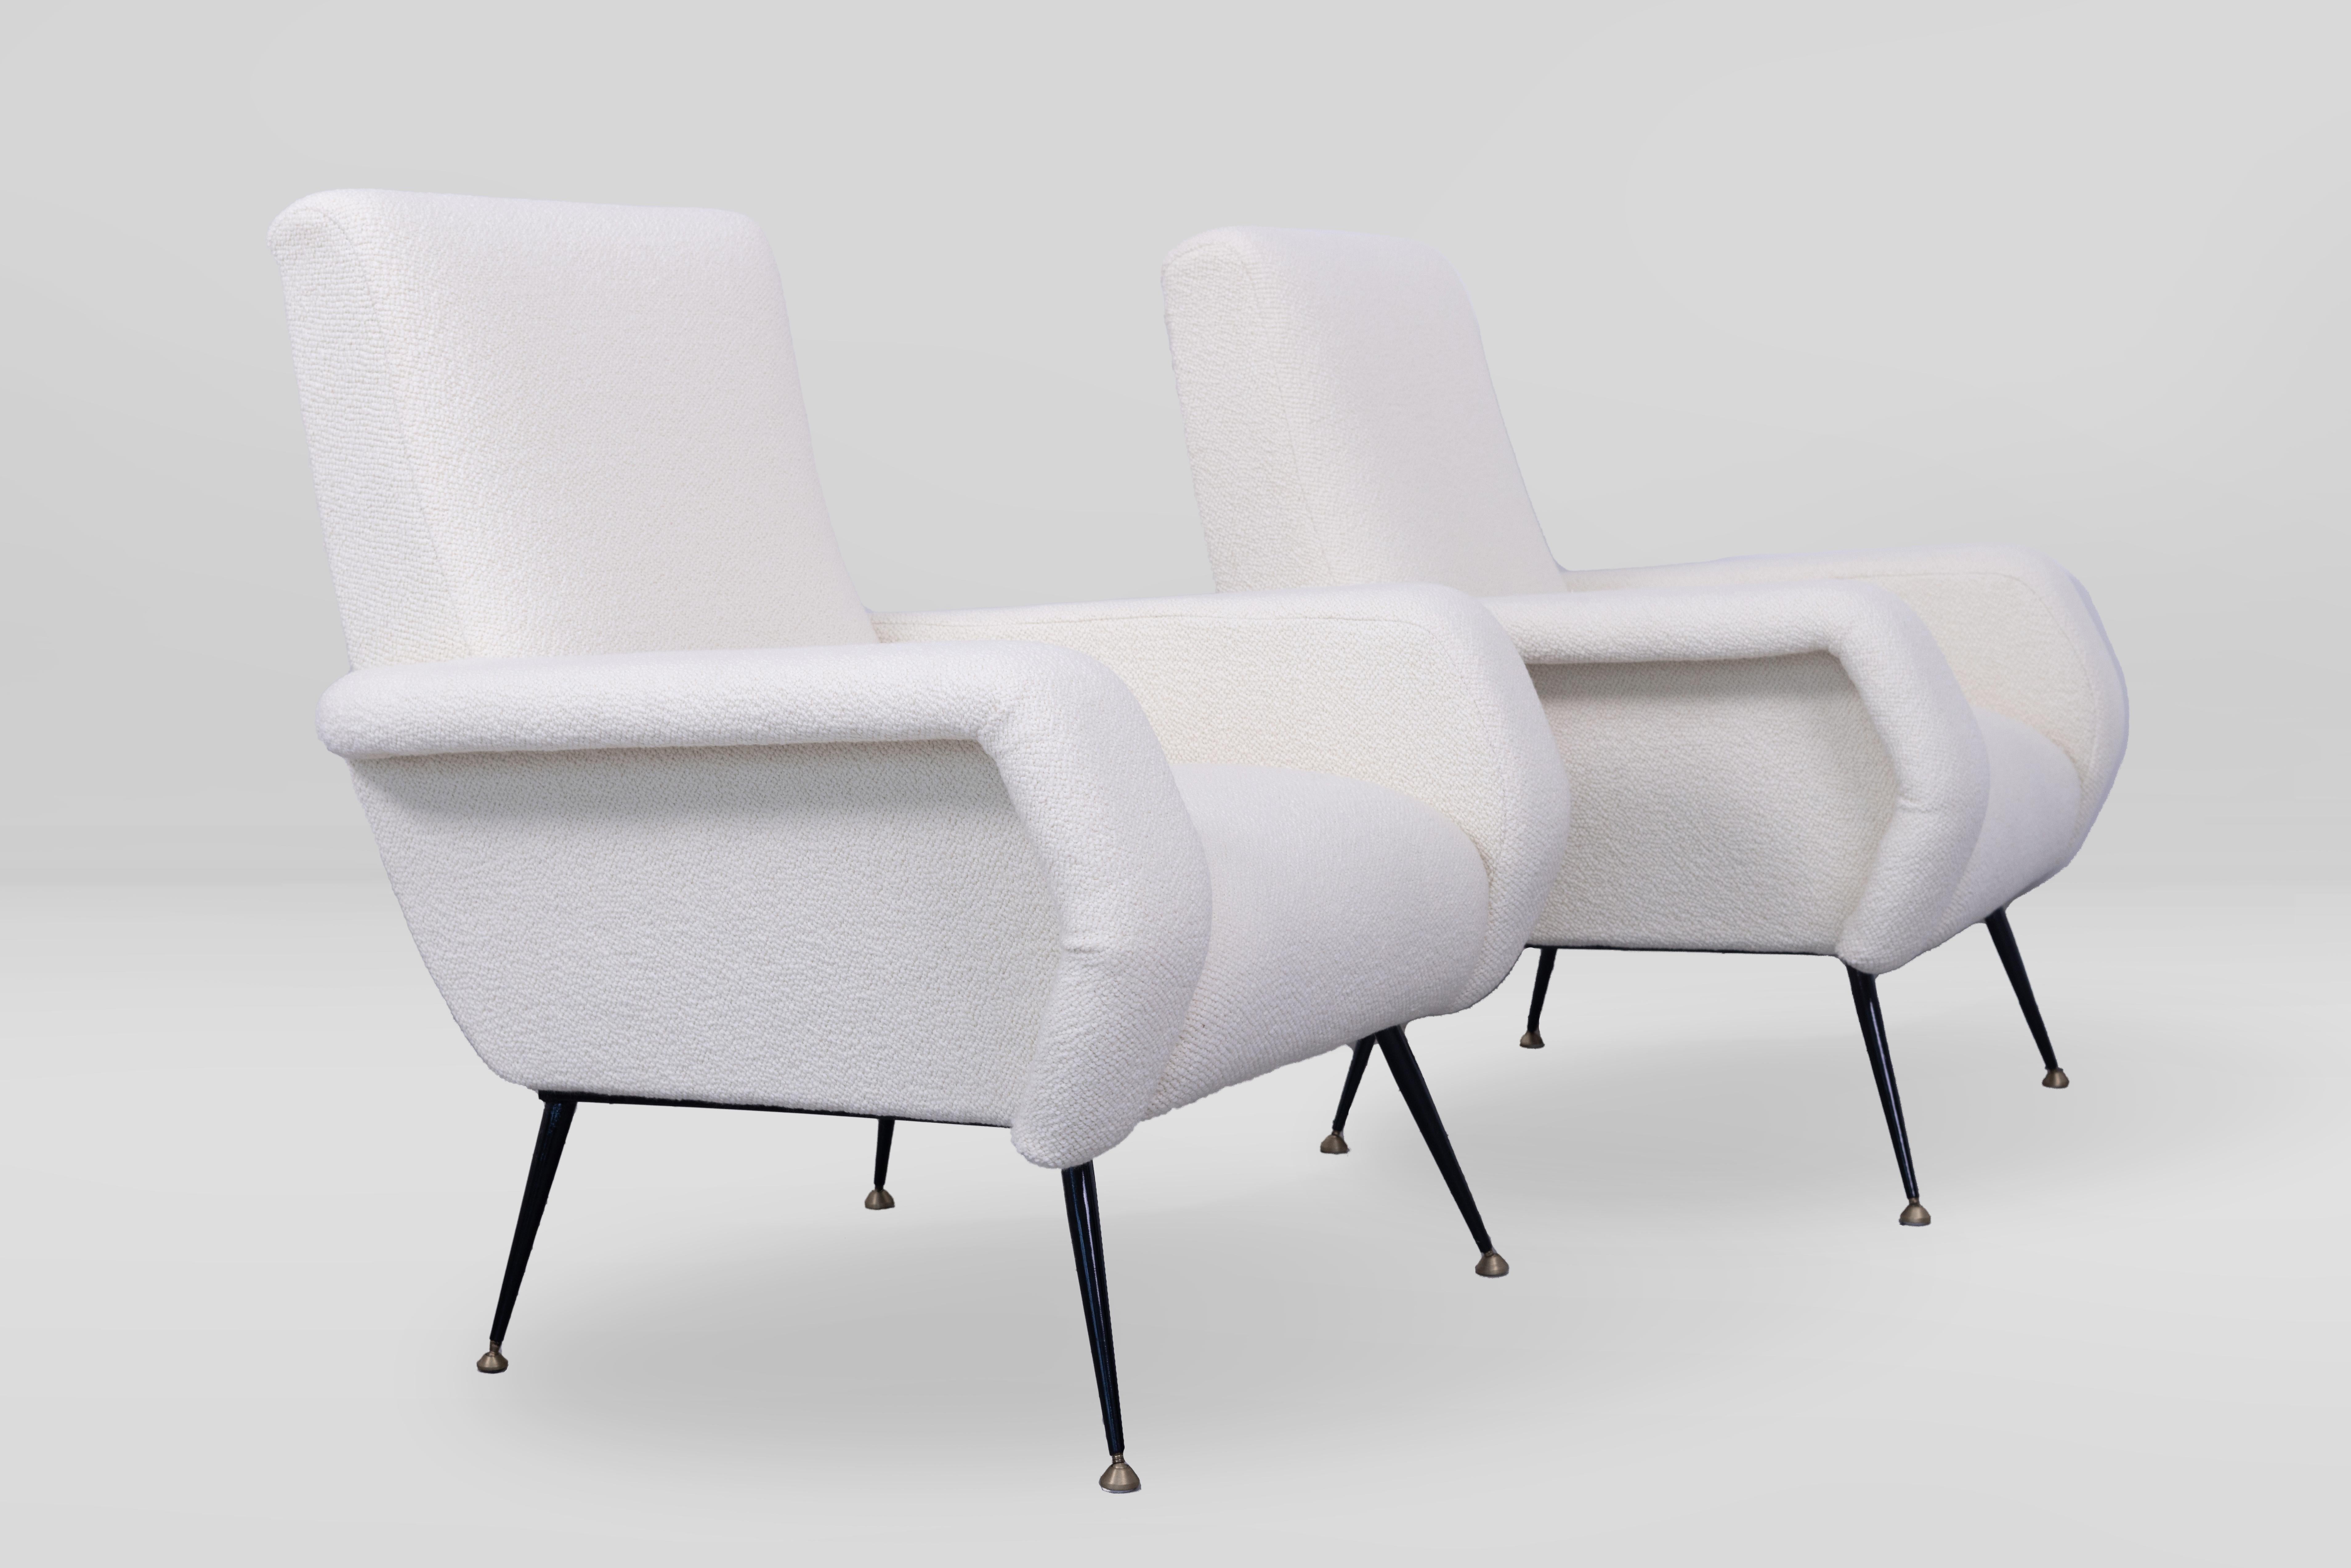 Italian Pair of Armchairs by Gigi Radice, Italy 1950s, Upholstered in Ivory Boucle’